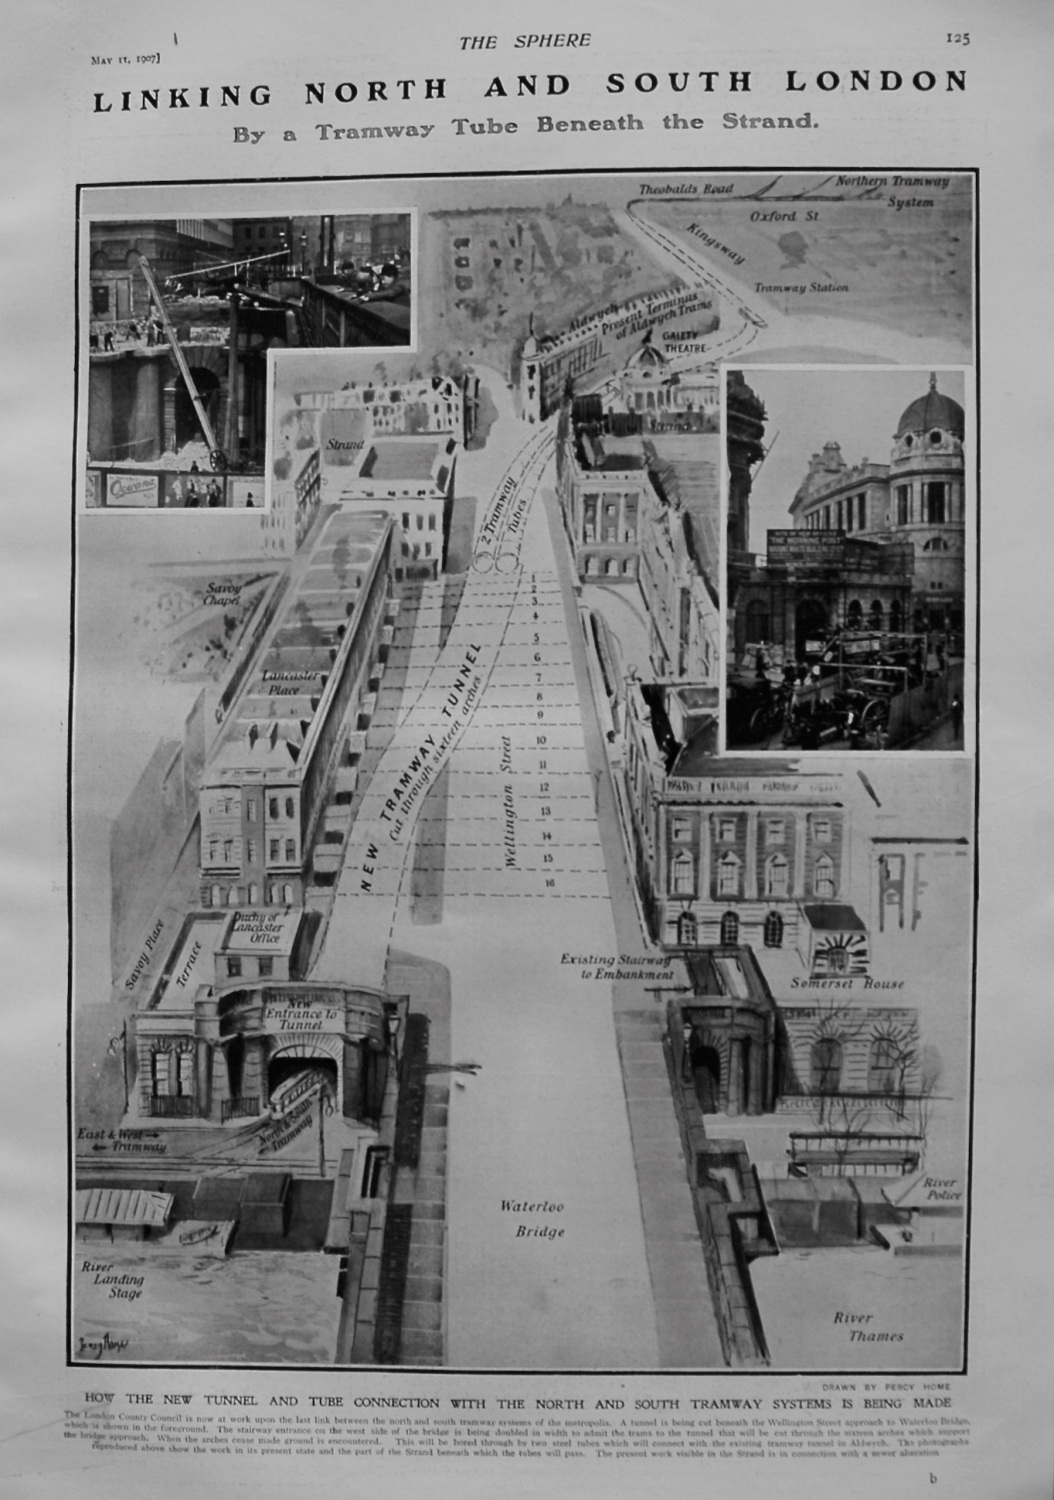 Linking North and South London by a Tramway Tube Beneath The Strand. 1907